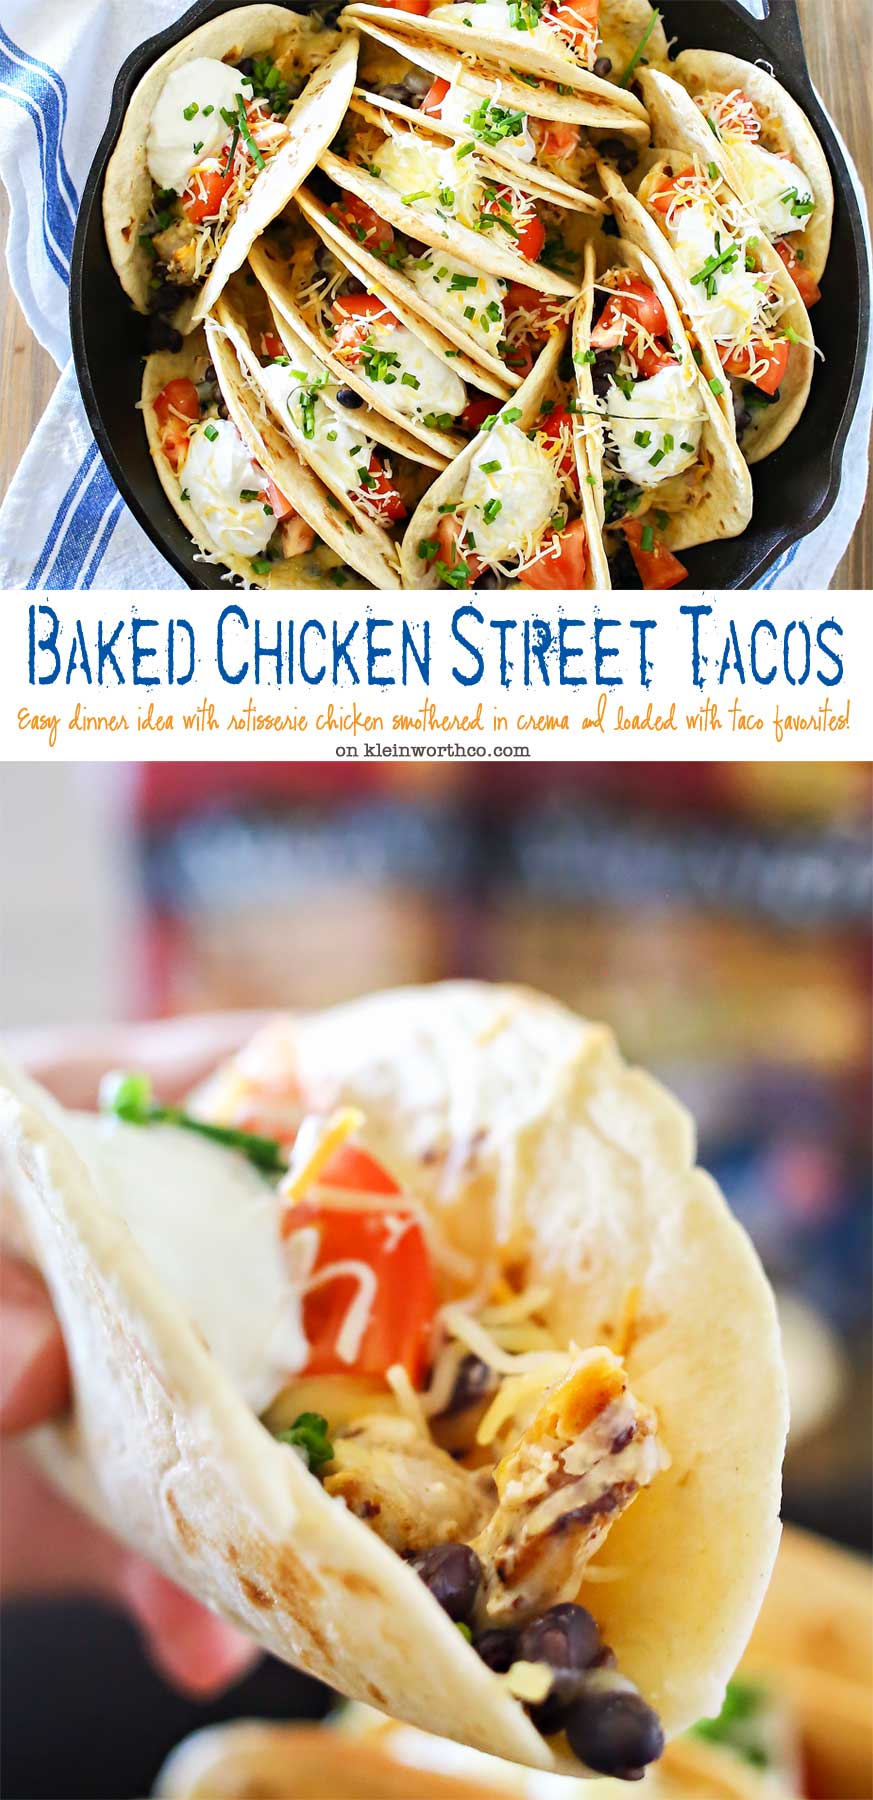 Baked Chicken Street Tacos are an easy family dinner idea. Quick to make using rotisserie chicken smothered in homemade crema & baked in the iron skillet. Seriously SO GOOD we made them twice in one weekend! 